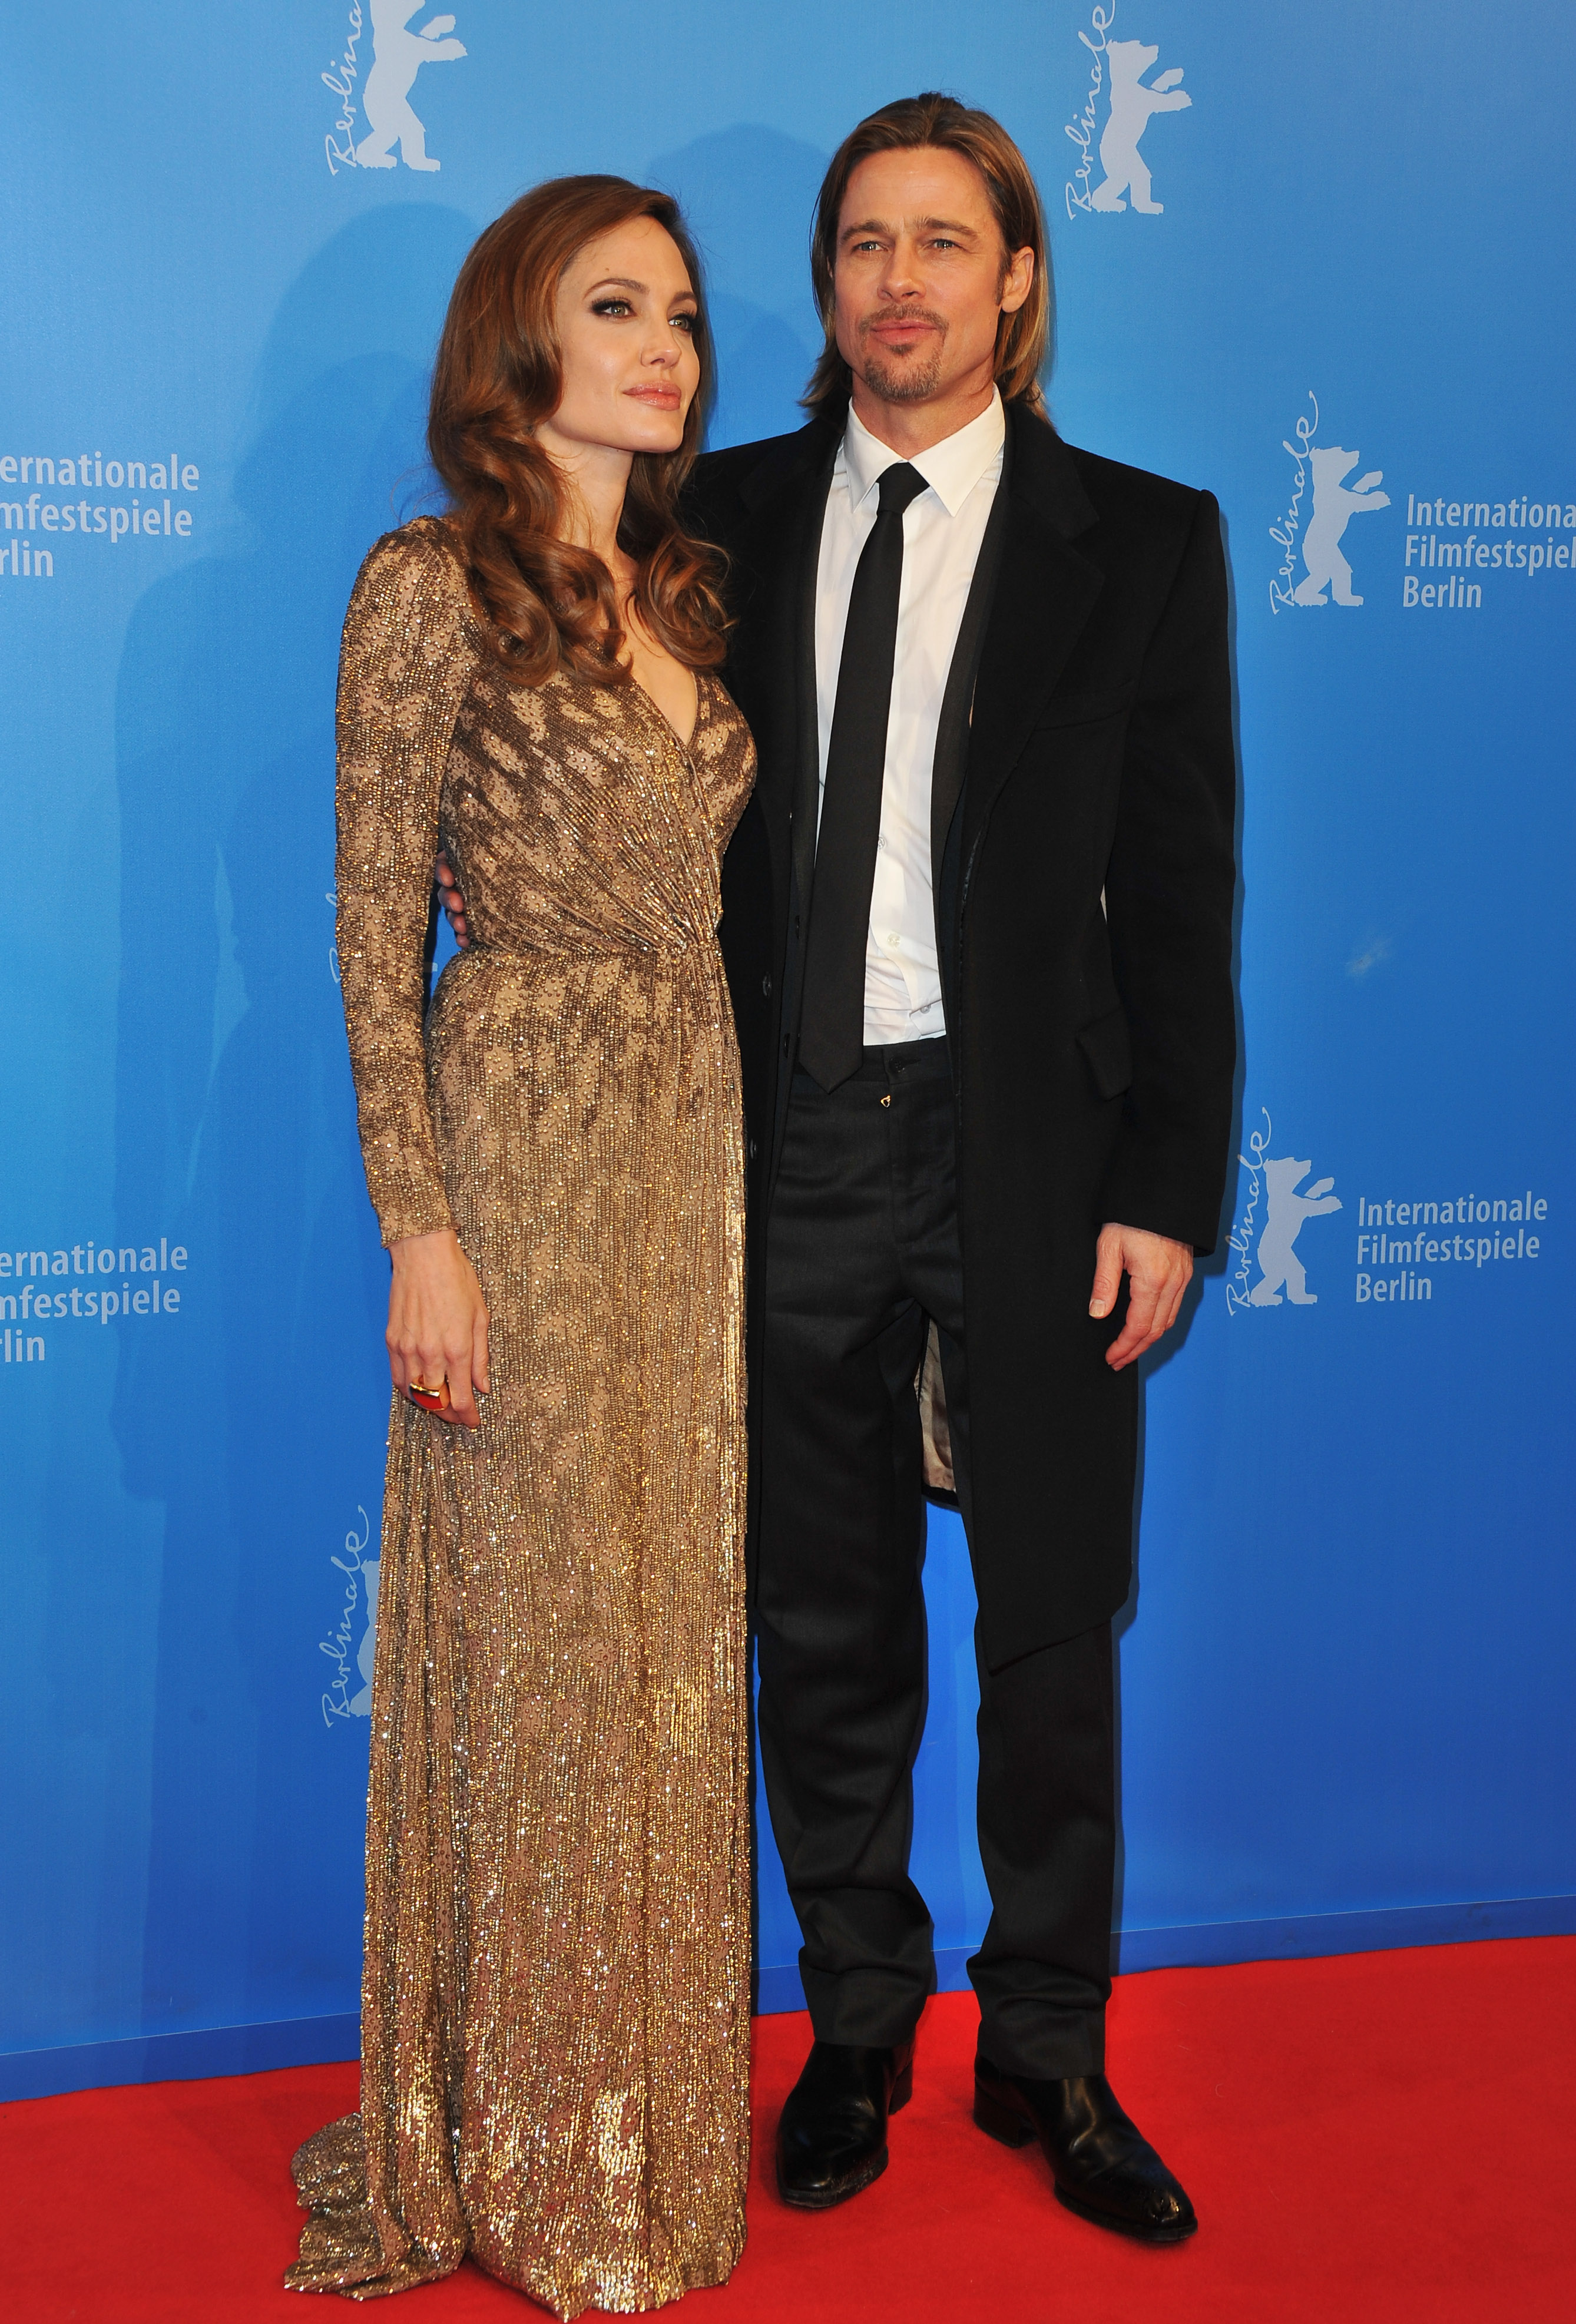 Brad Pitt and Angelina Jolie on February 11, 2012 in Berlin, Germany | Source: Getty Images